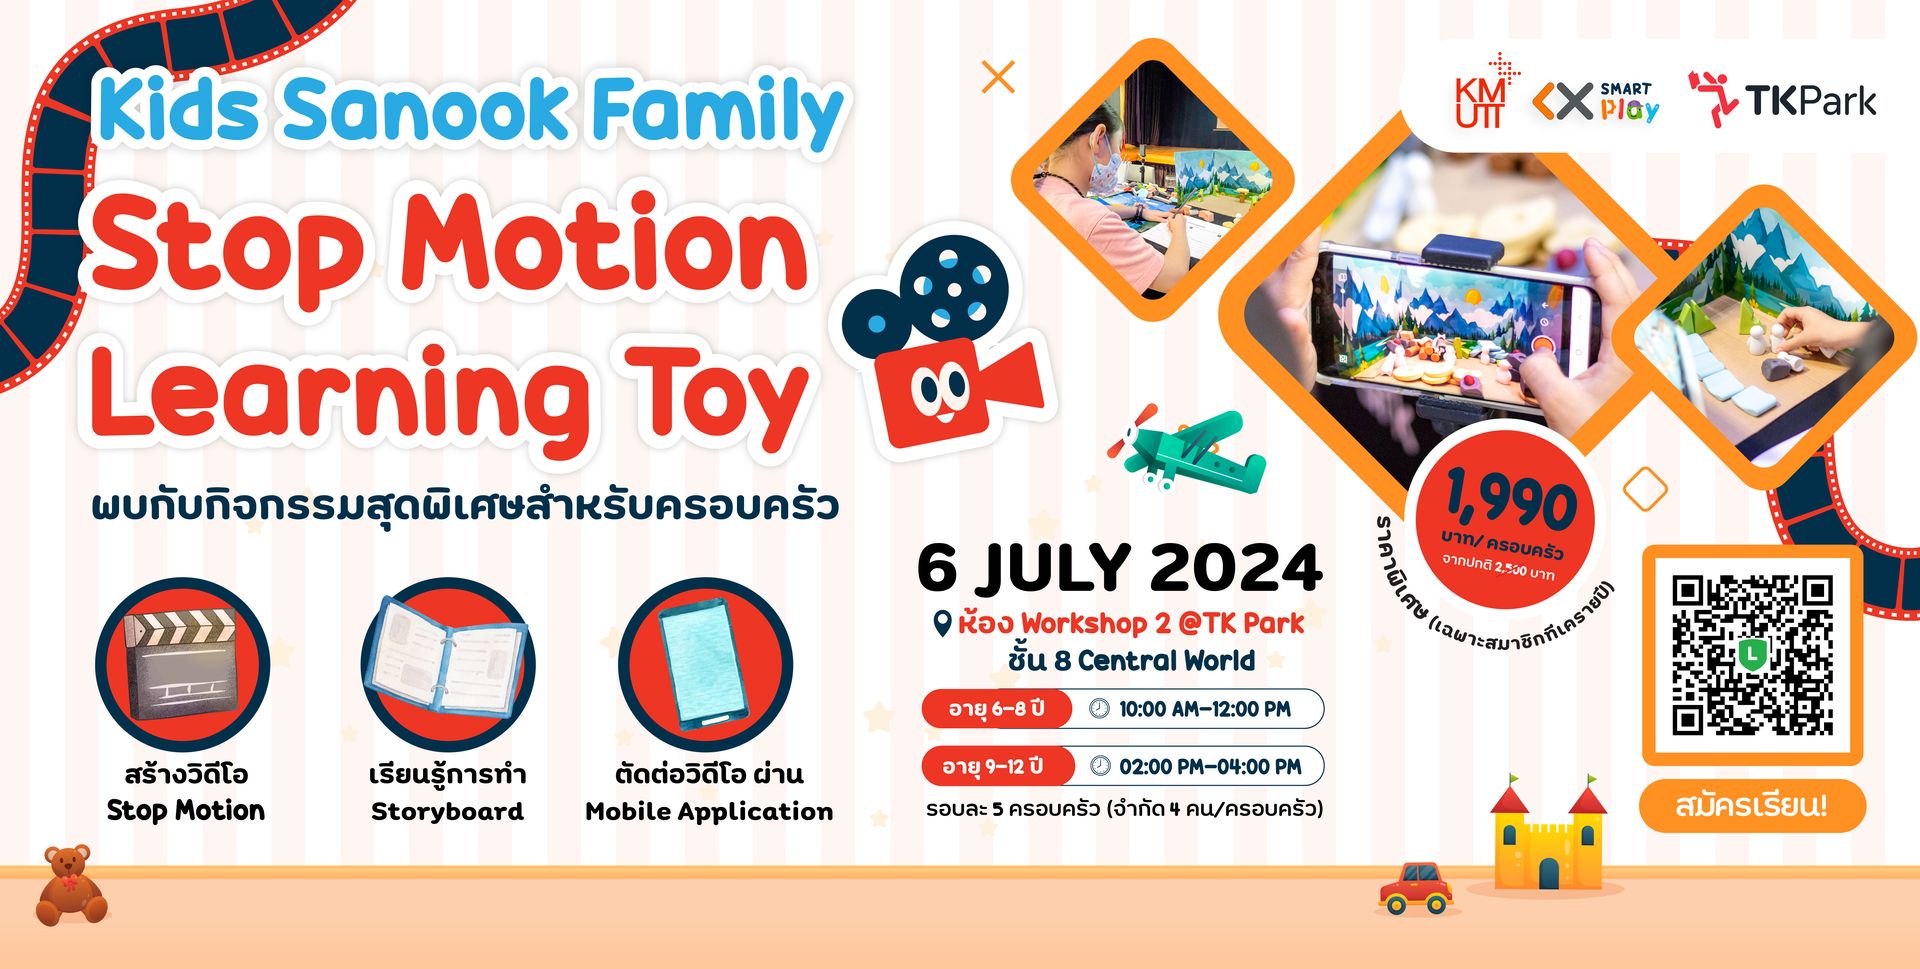 KIDS Sanook Family ไปกับ “Stop Motion Learning Toy”